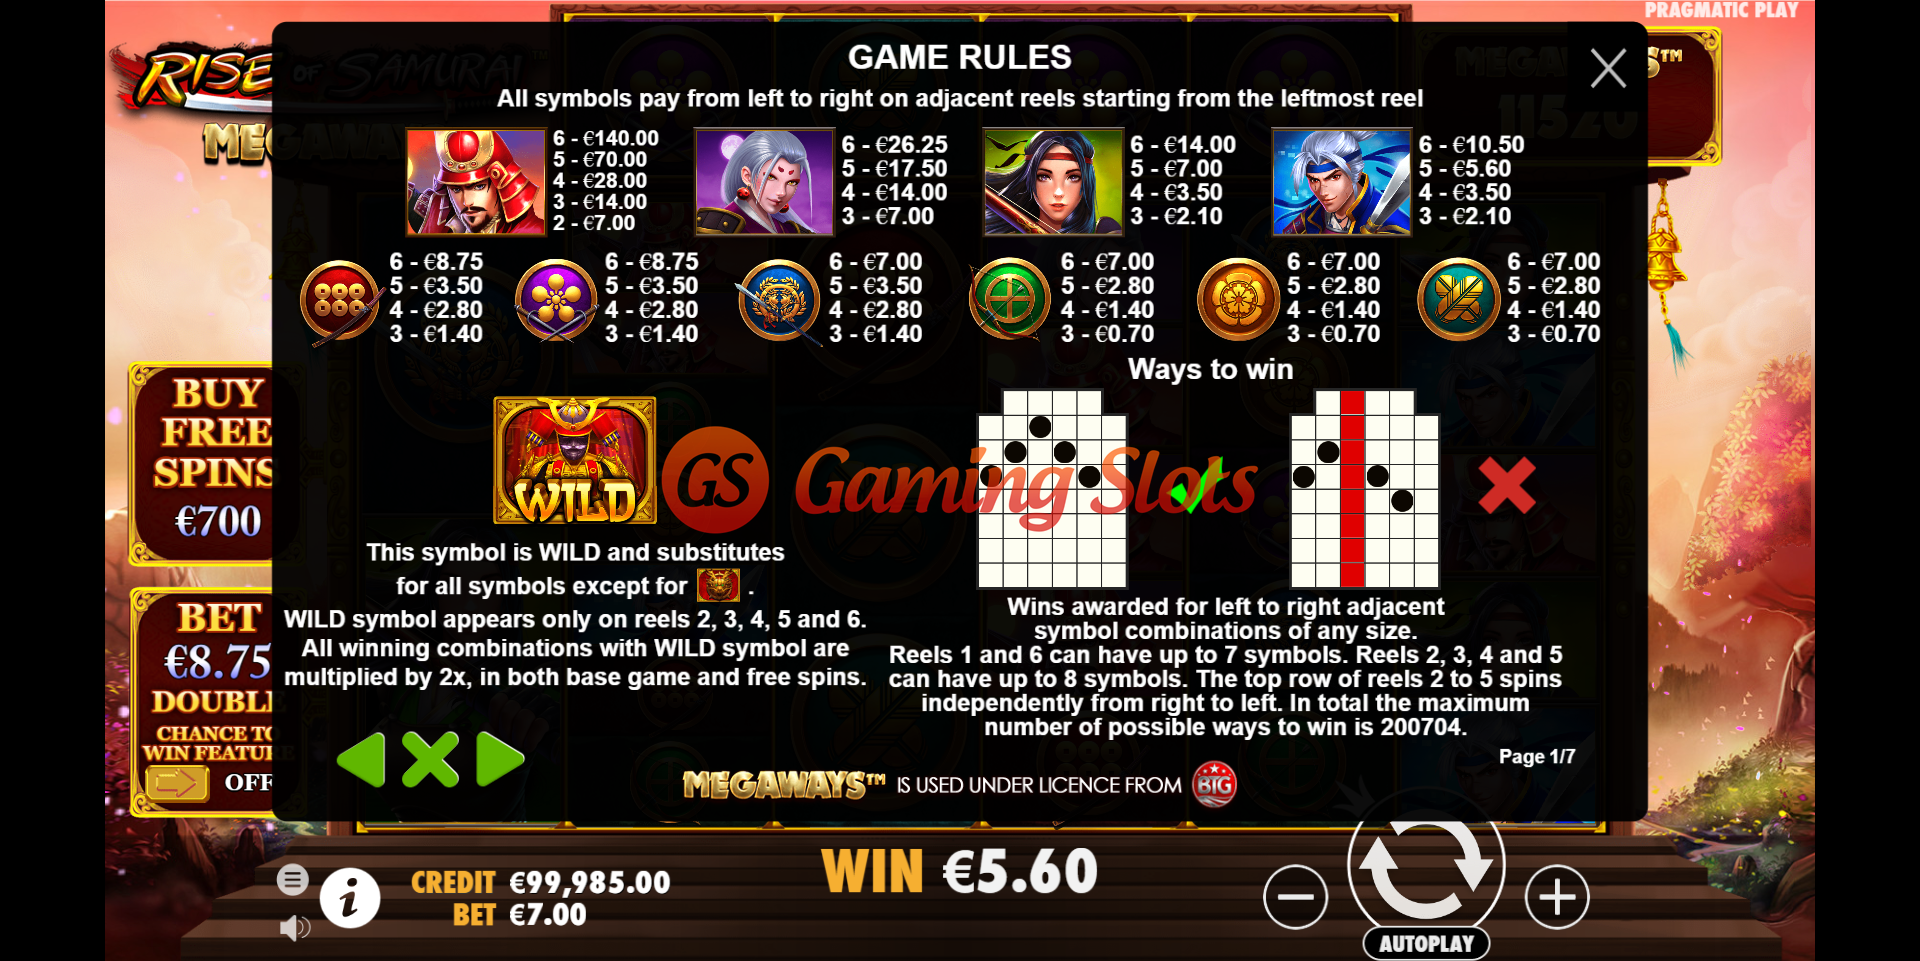 Game Rules for Rise of Samurai Megaways slot from Pragmatic Play